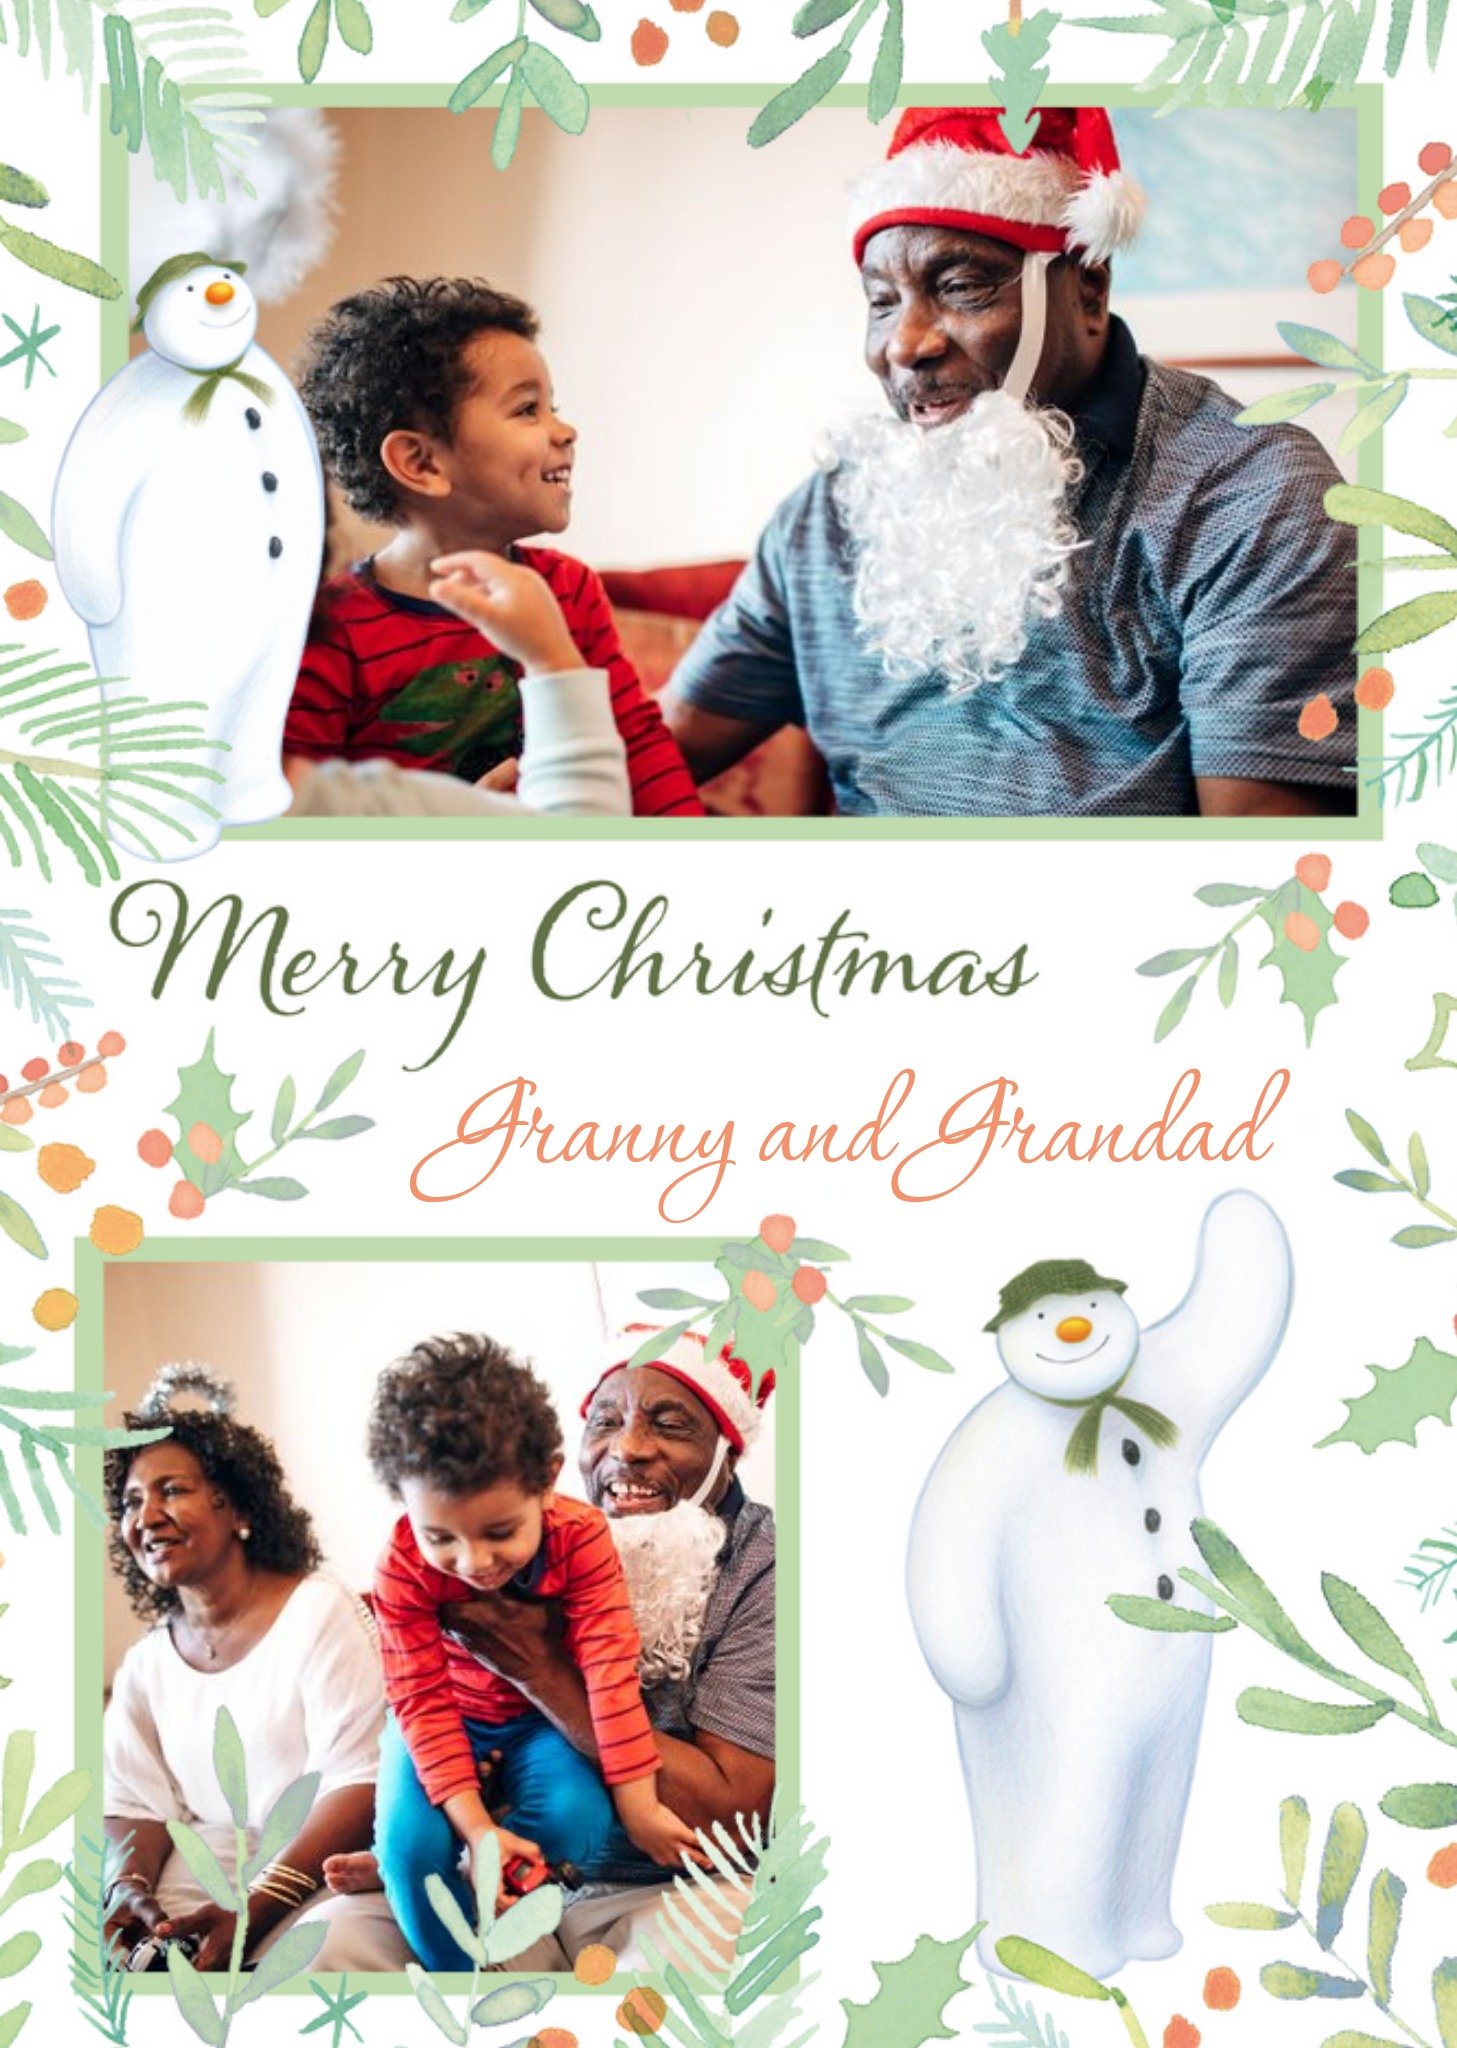 The Snowman Merry Christmas To Granny And Grandad Photo Upload Christmas Card Ecard